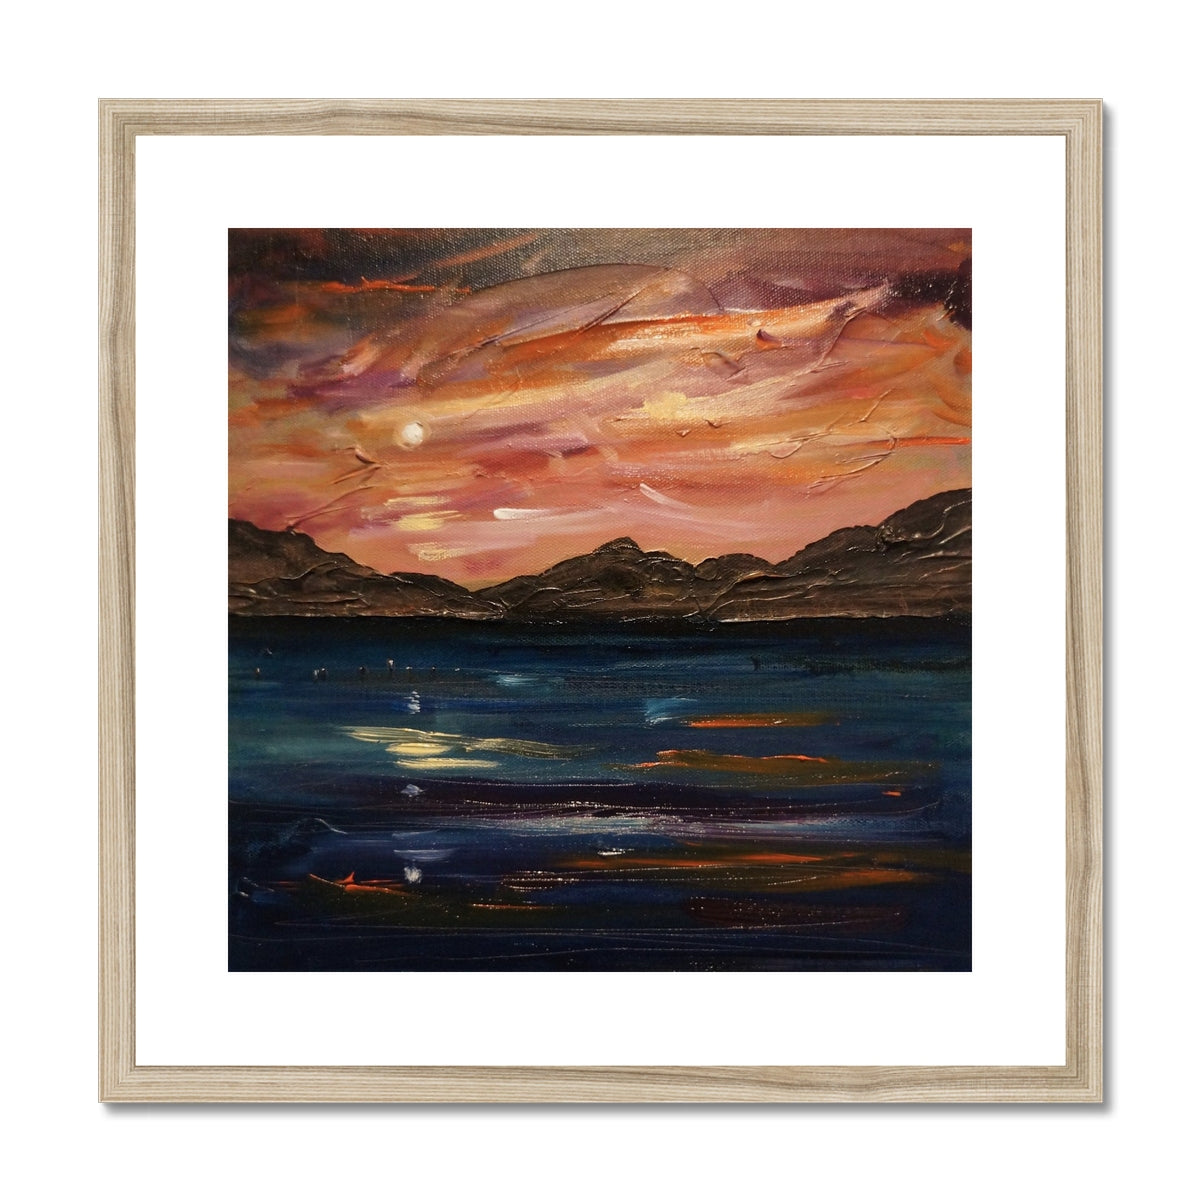 Loch Ness Moonset Painting | Framed & Mounted Prints From Scotland-Framed & Mounted Prints-Scottish Lochs & Mountains Art Gallery-20"x20"-Natural Frame-Paintings, Prints, Homeware, Art Gifts From Scotland By Scottish Artist Kevin Hunter